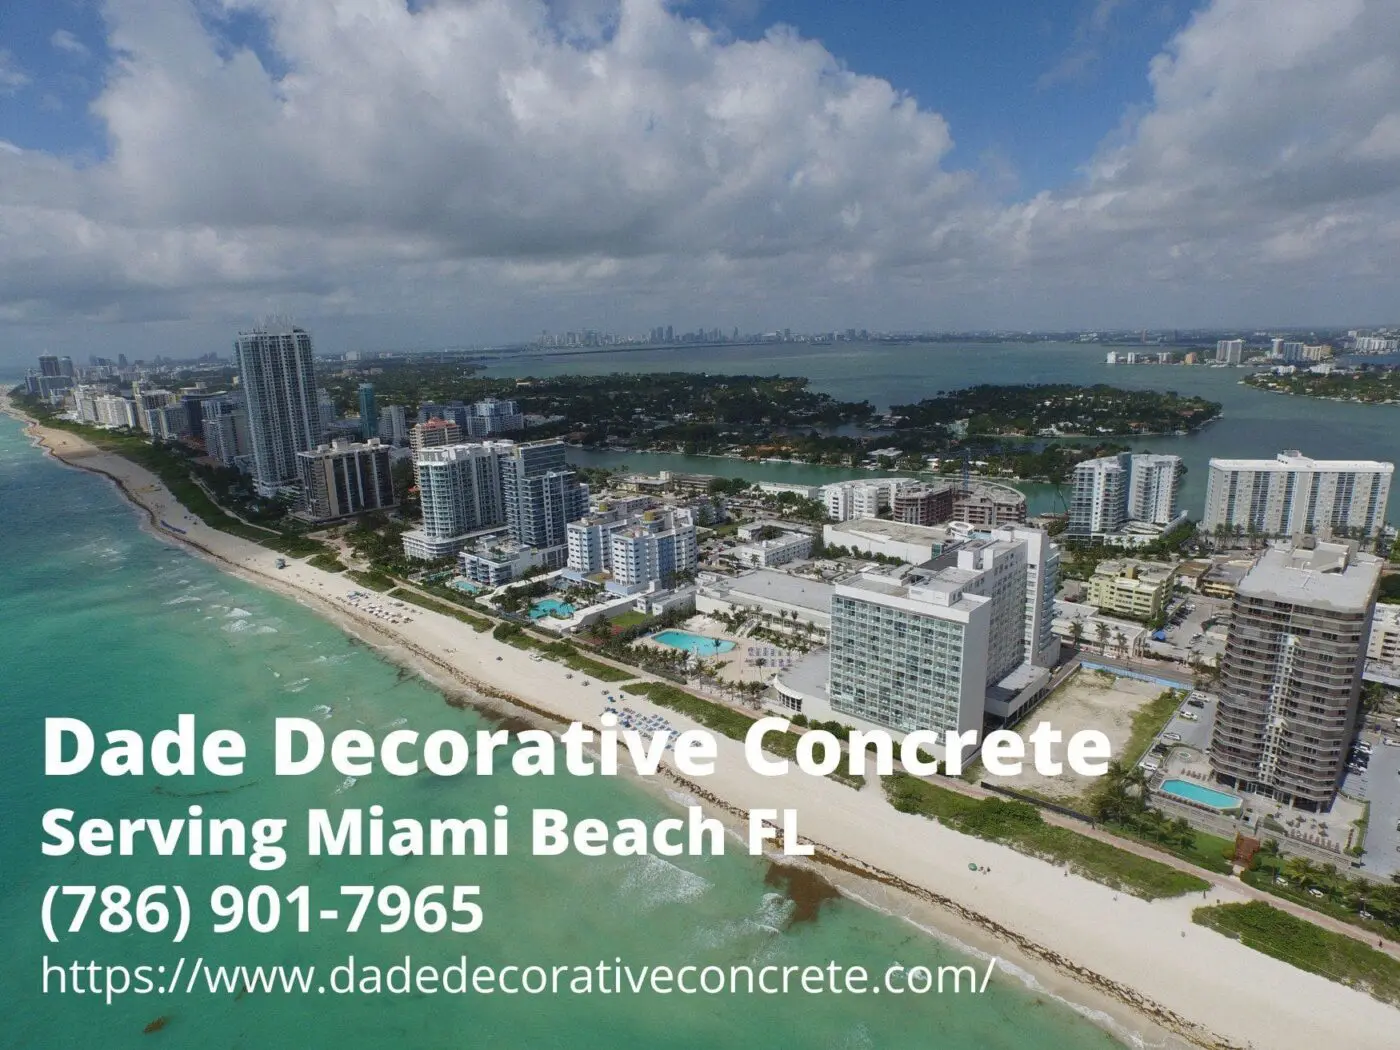 aerial view of Miami Beach FL with the contact info of Dade Decorative Concrete